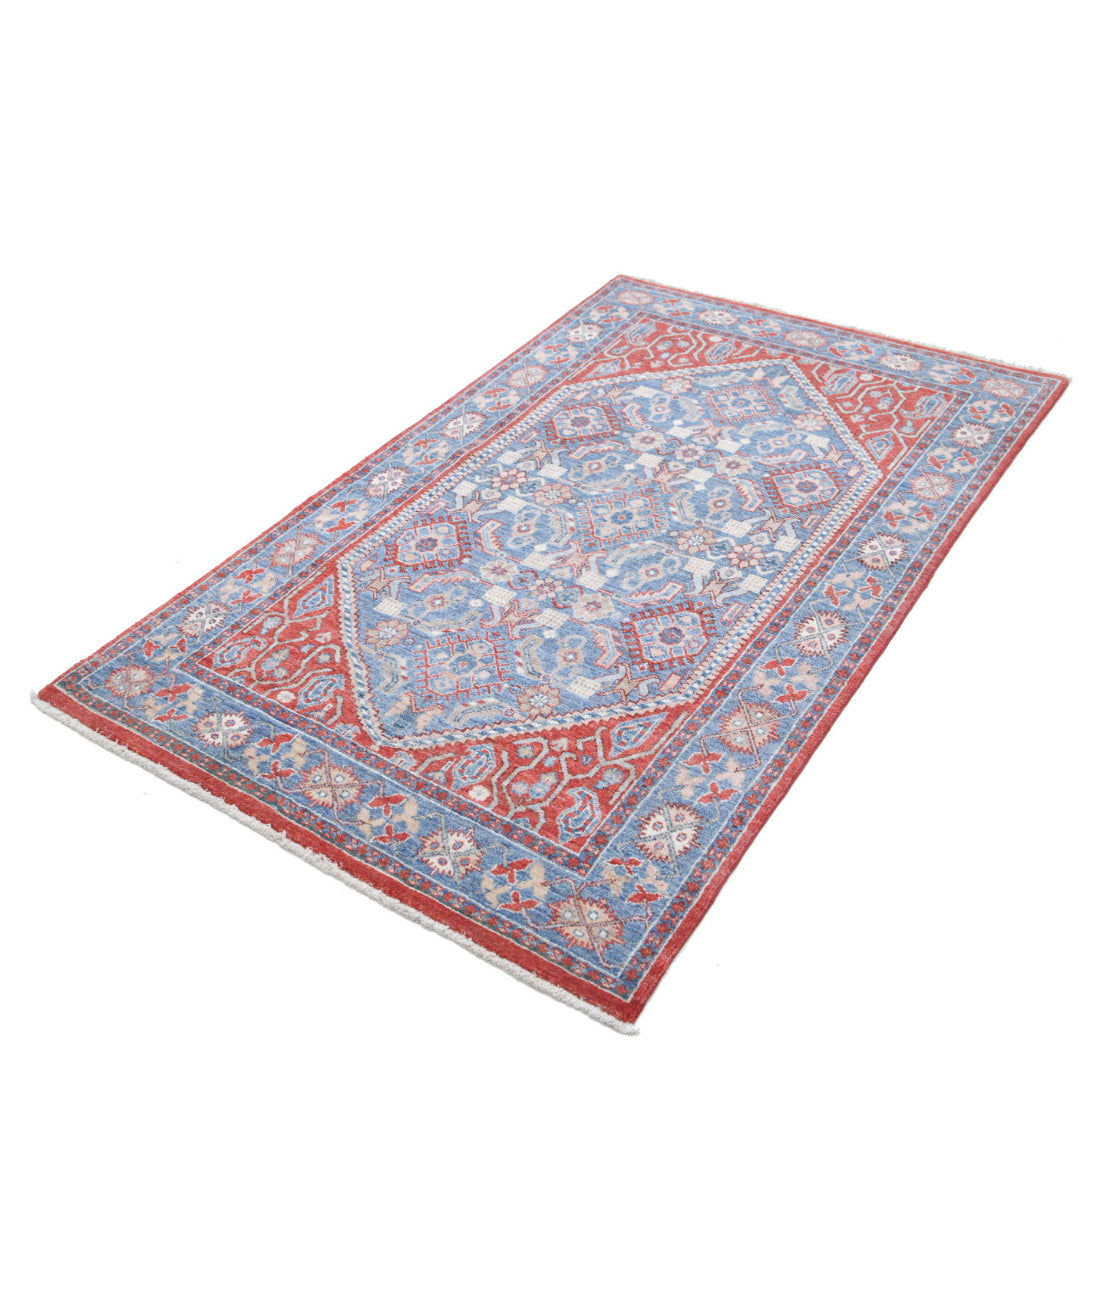 Heriz 3'8'' X 6'2'' Hand-Knotted Wool Rug 3'8'' x 6'2'' (110 X 185) / Red / Blue